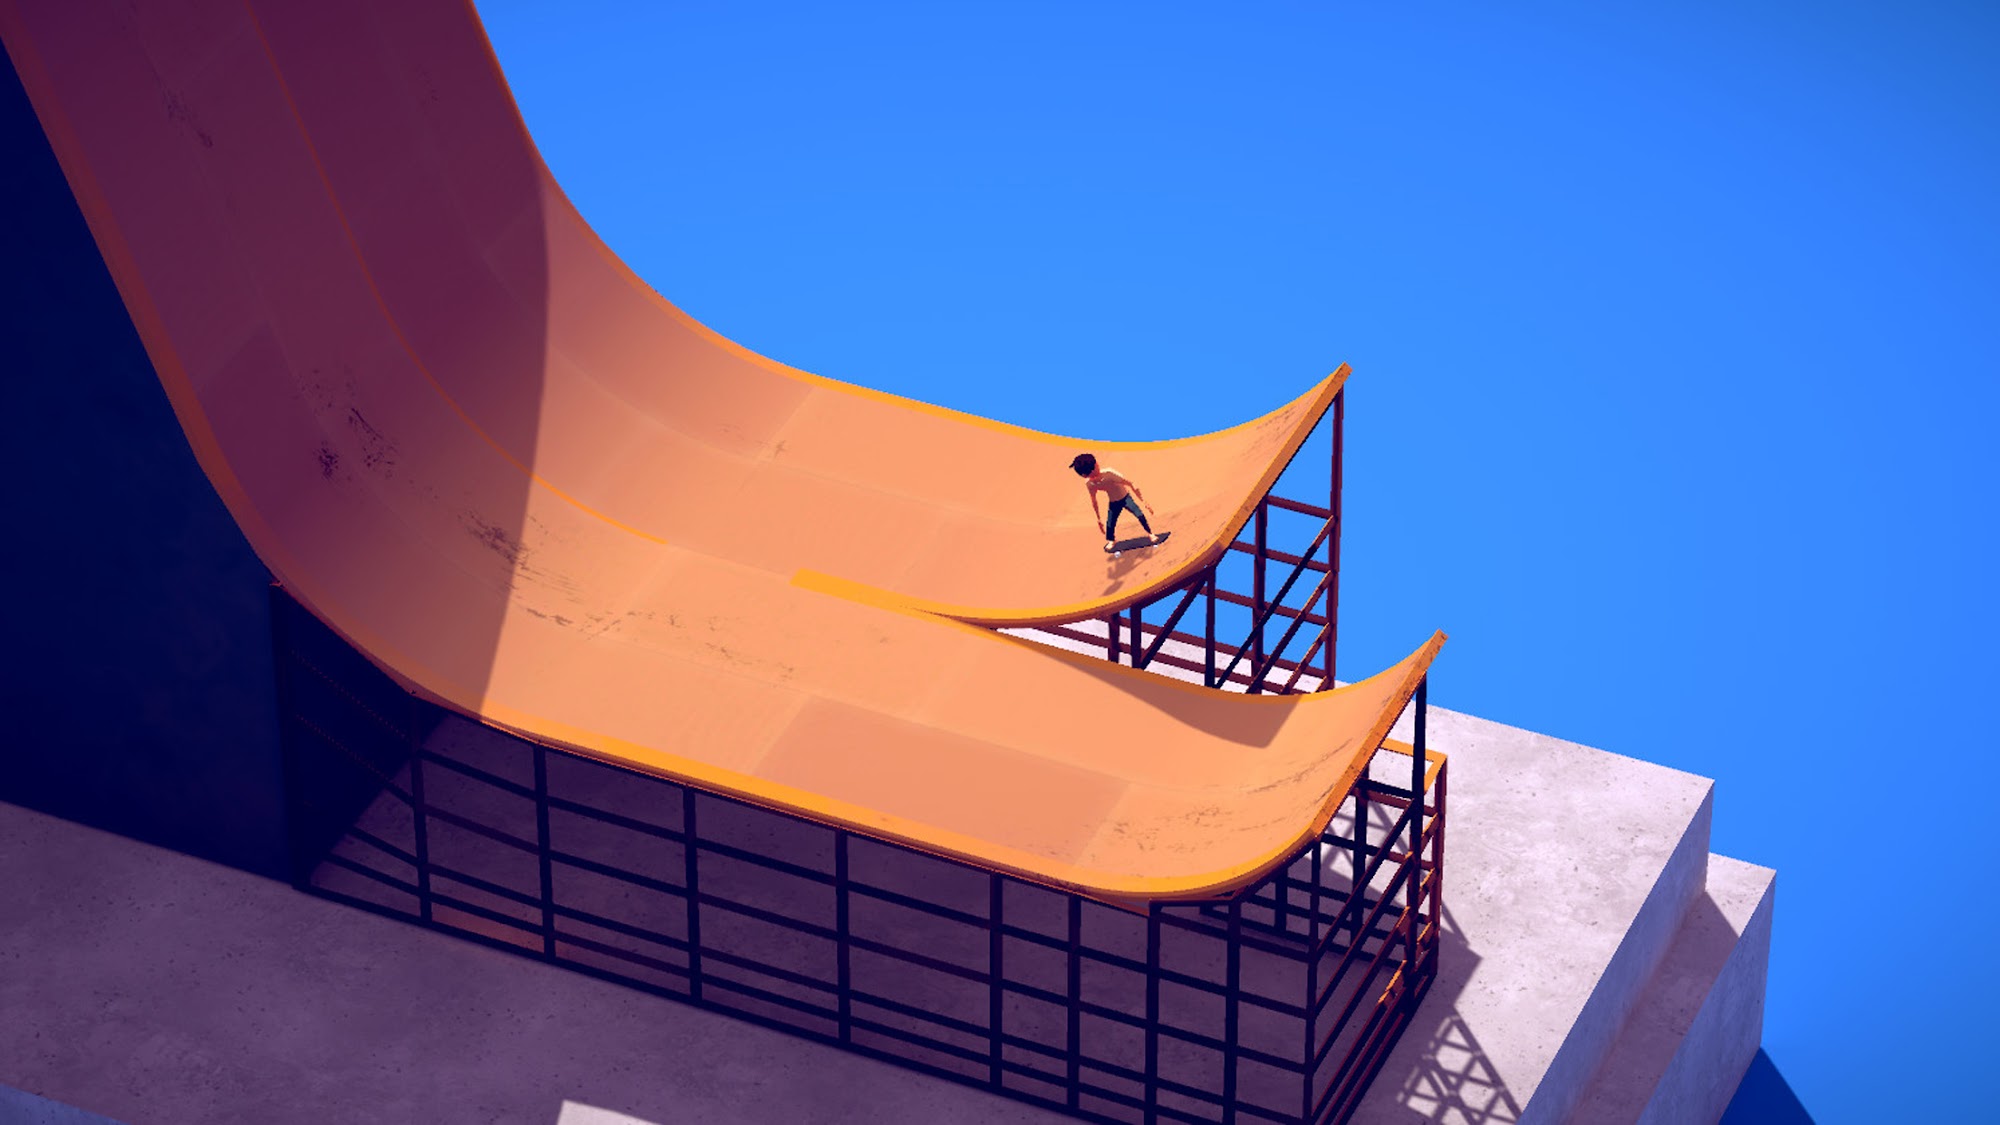 The Ramp - Android game screenshots.